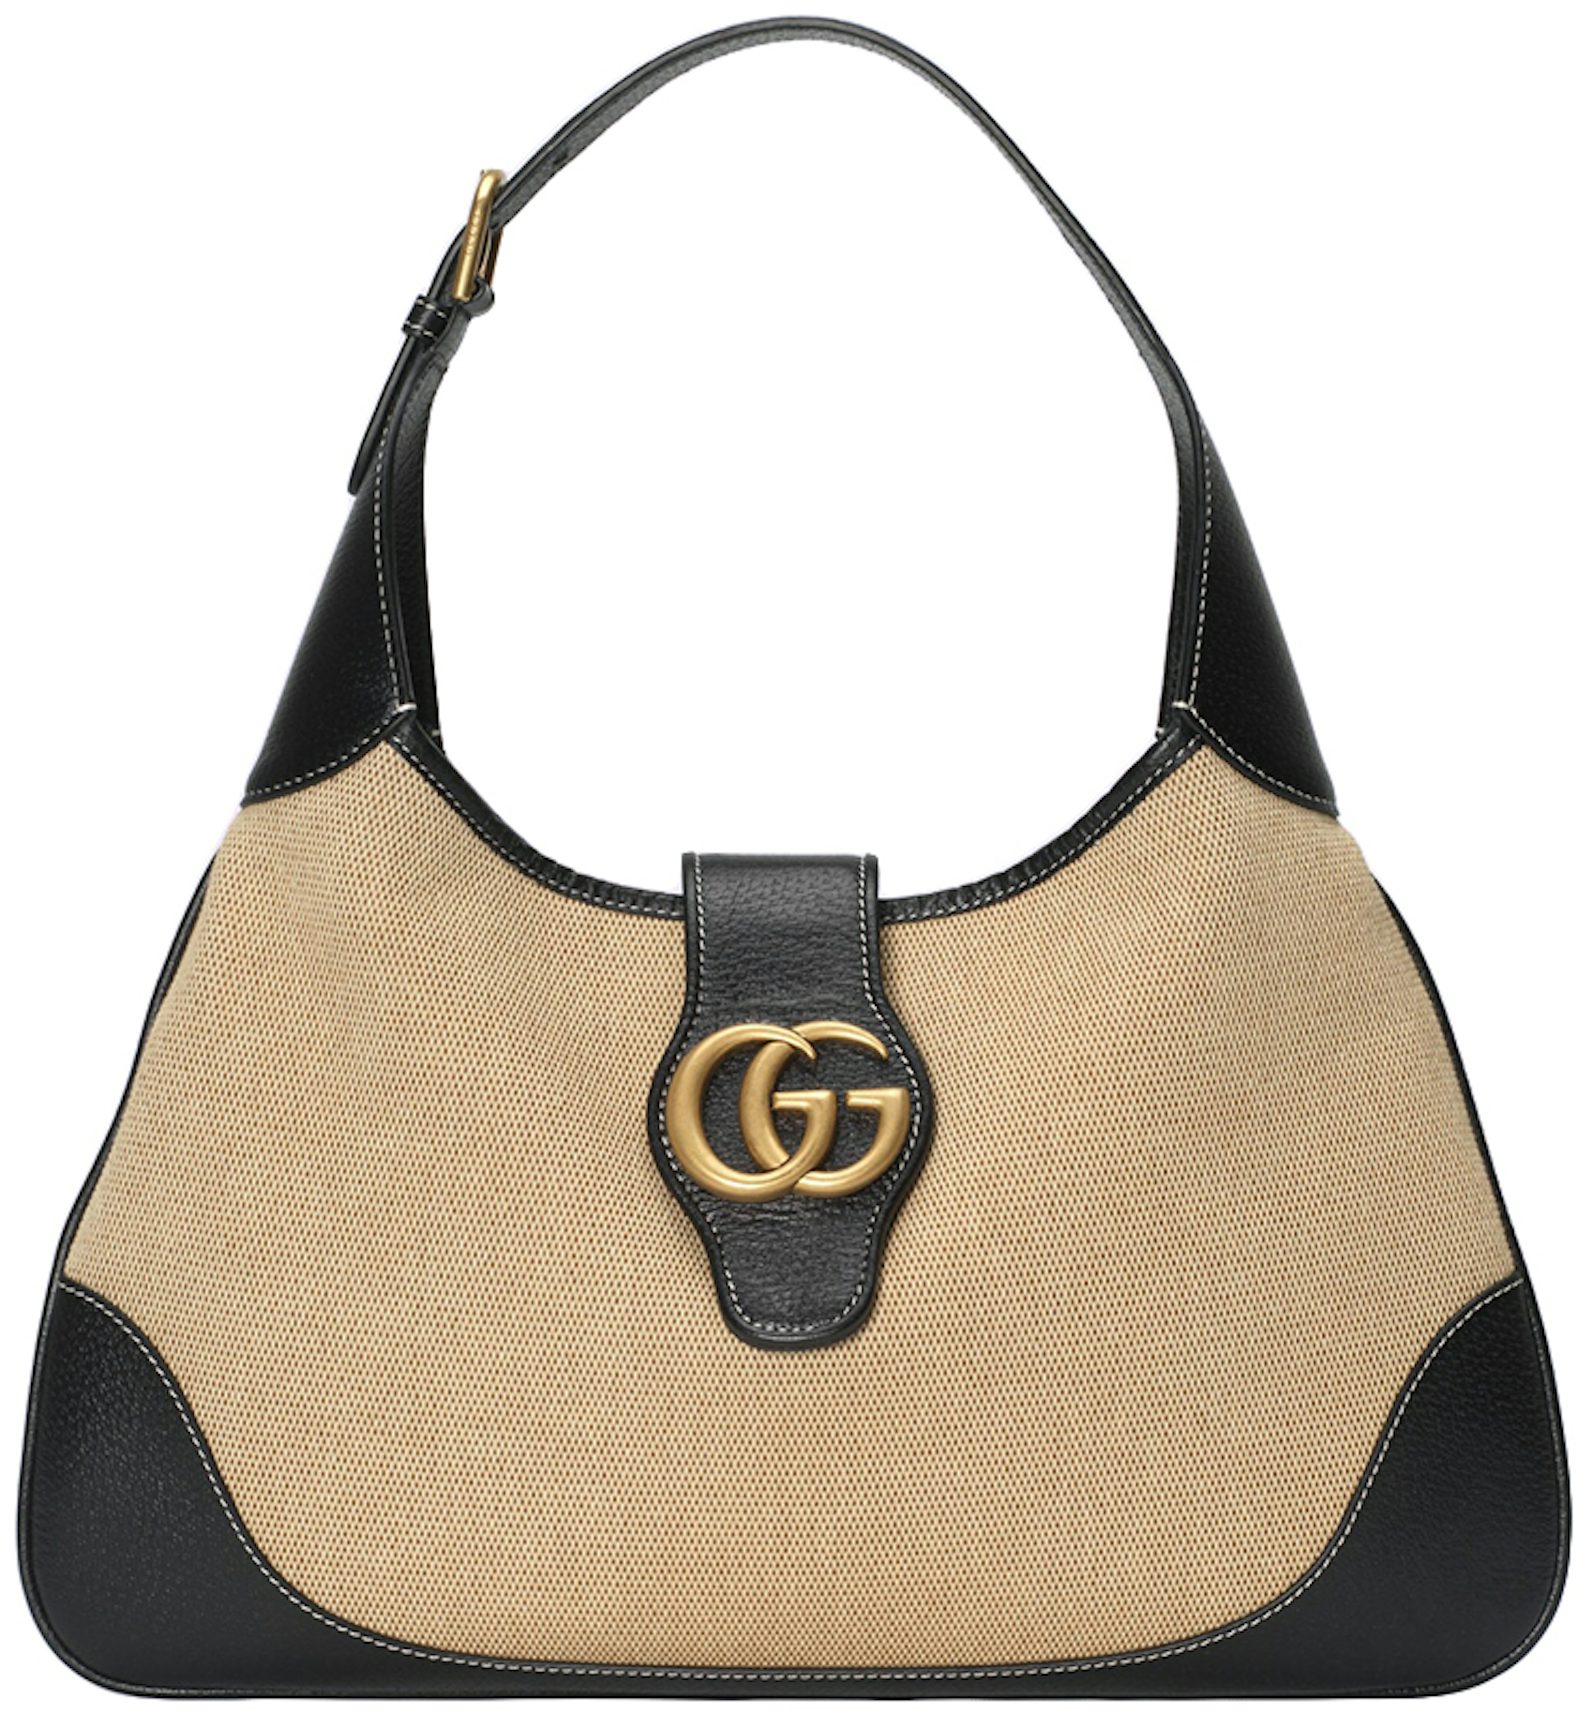 Buy Givenchy Bags & Handbags online - Women - 111 products